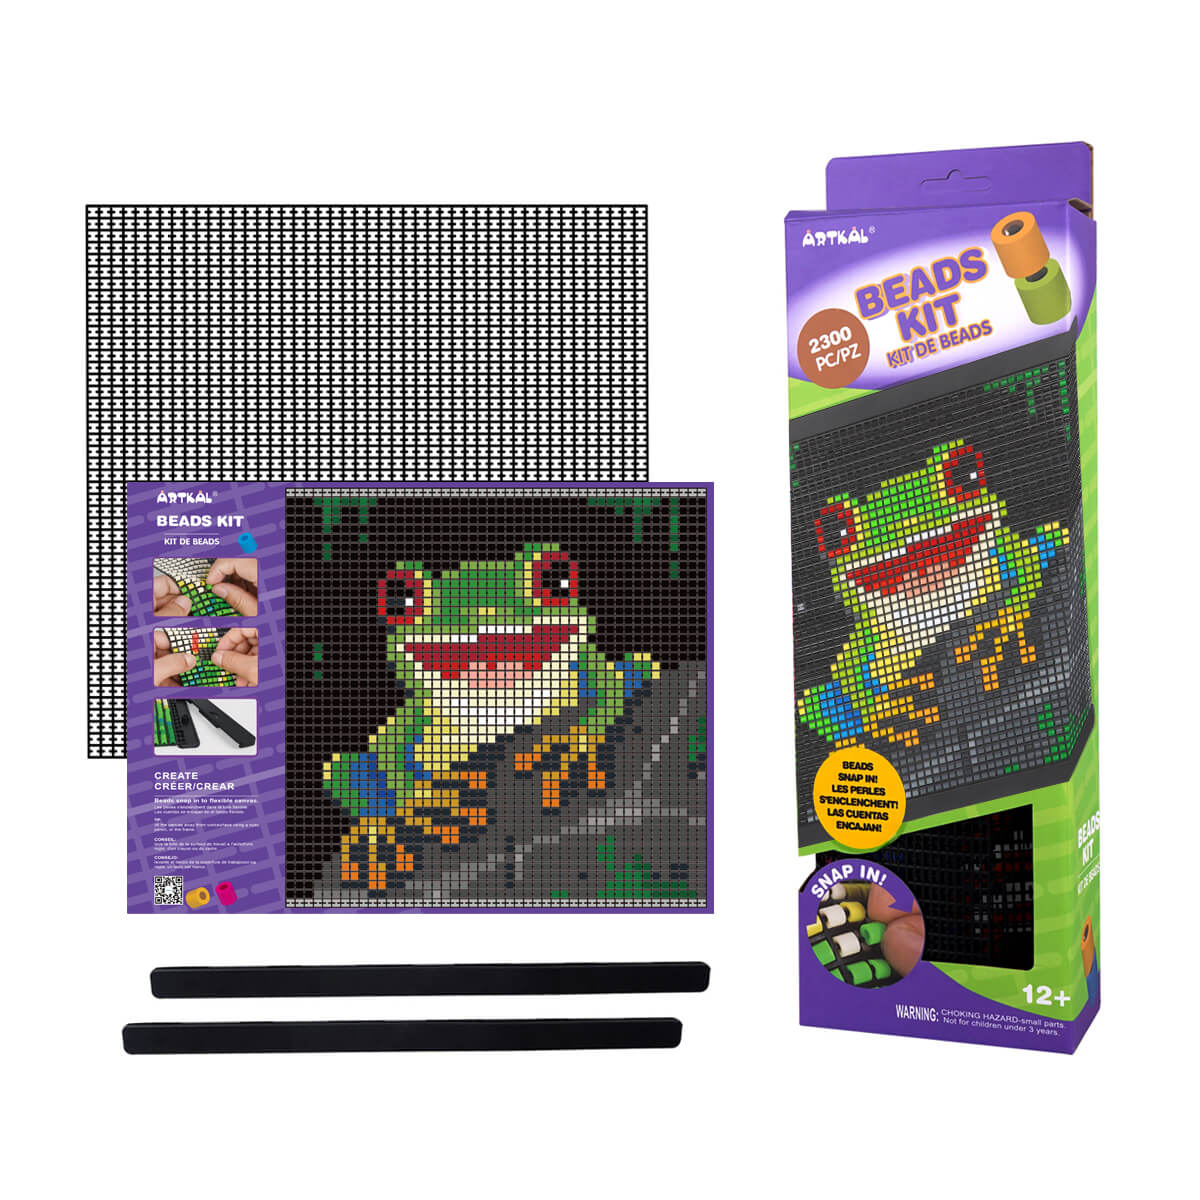 What Are the Benefits of Perler Bead Kits for Adults?